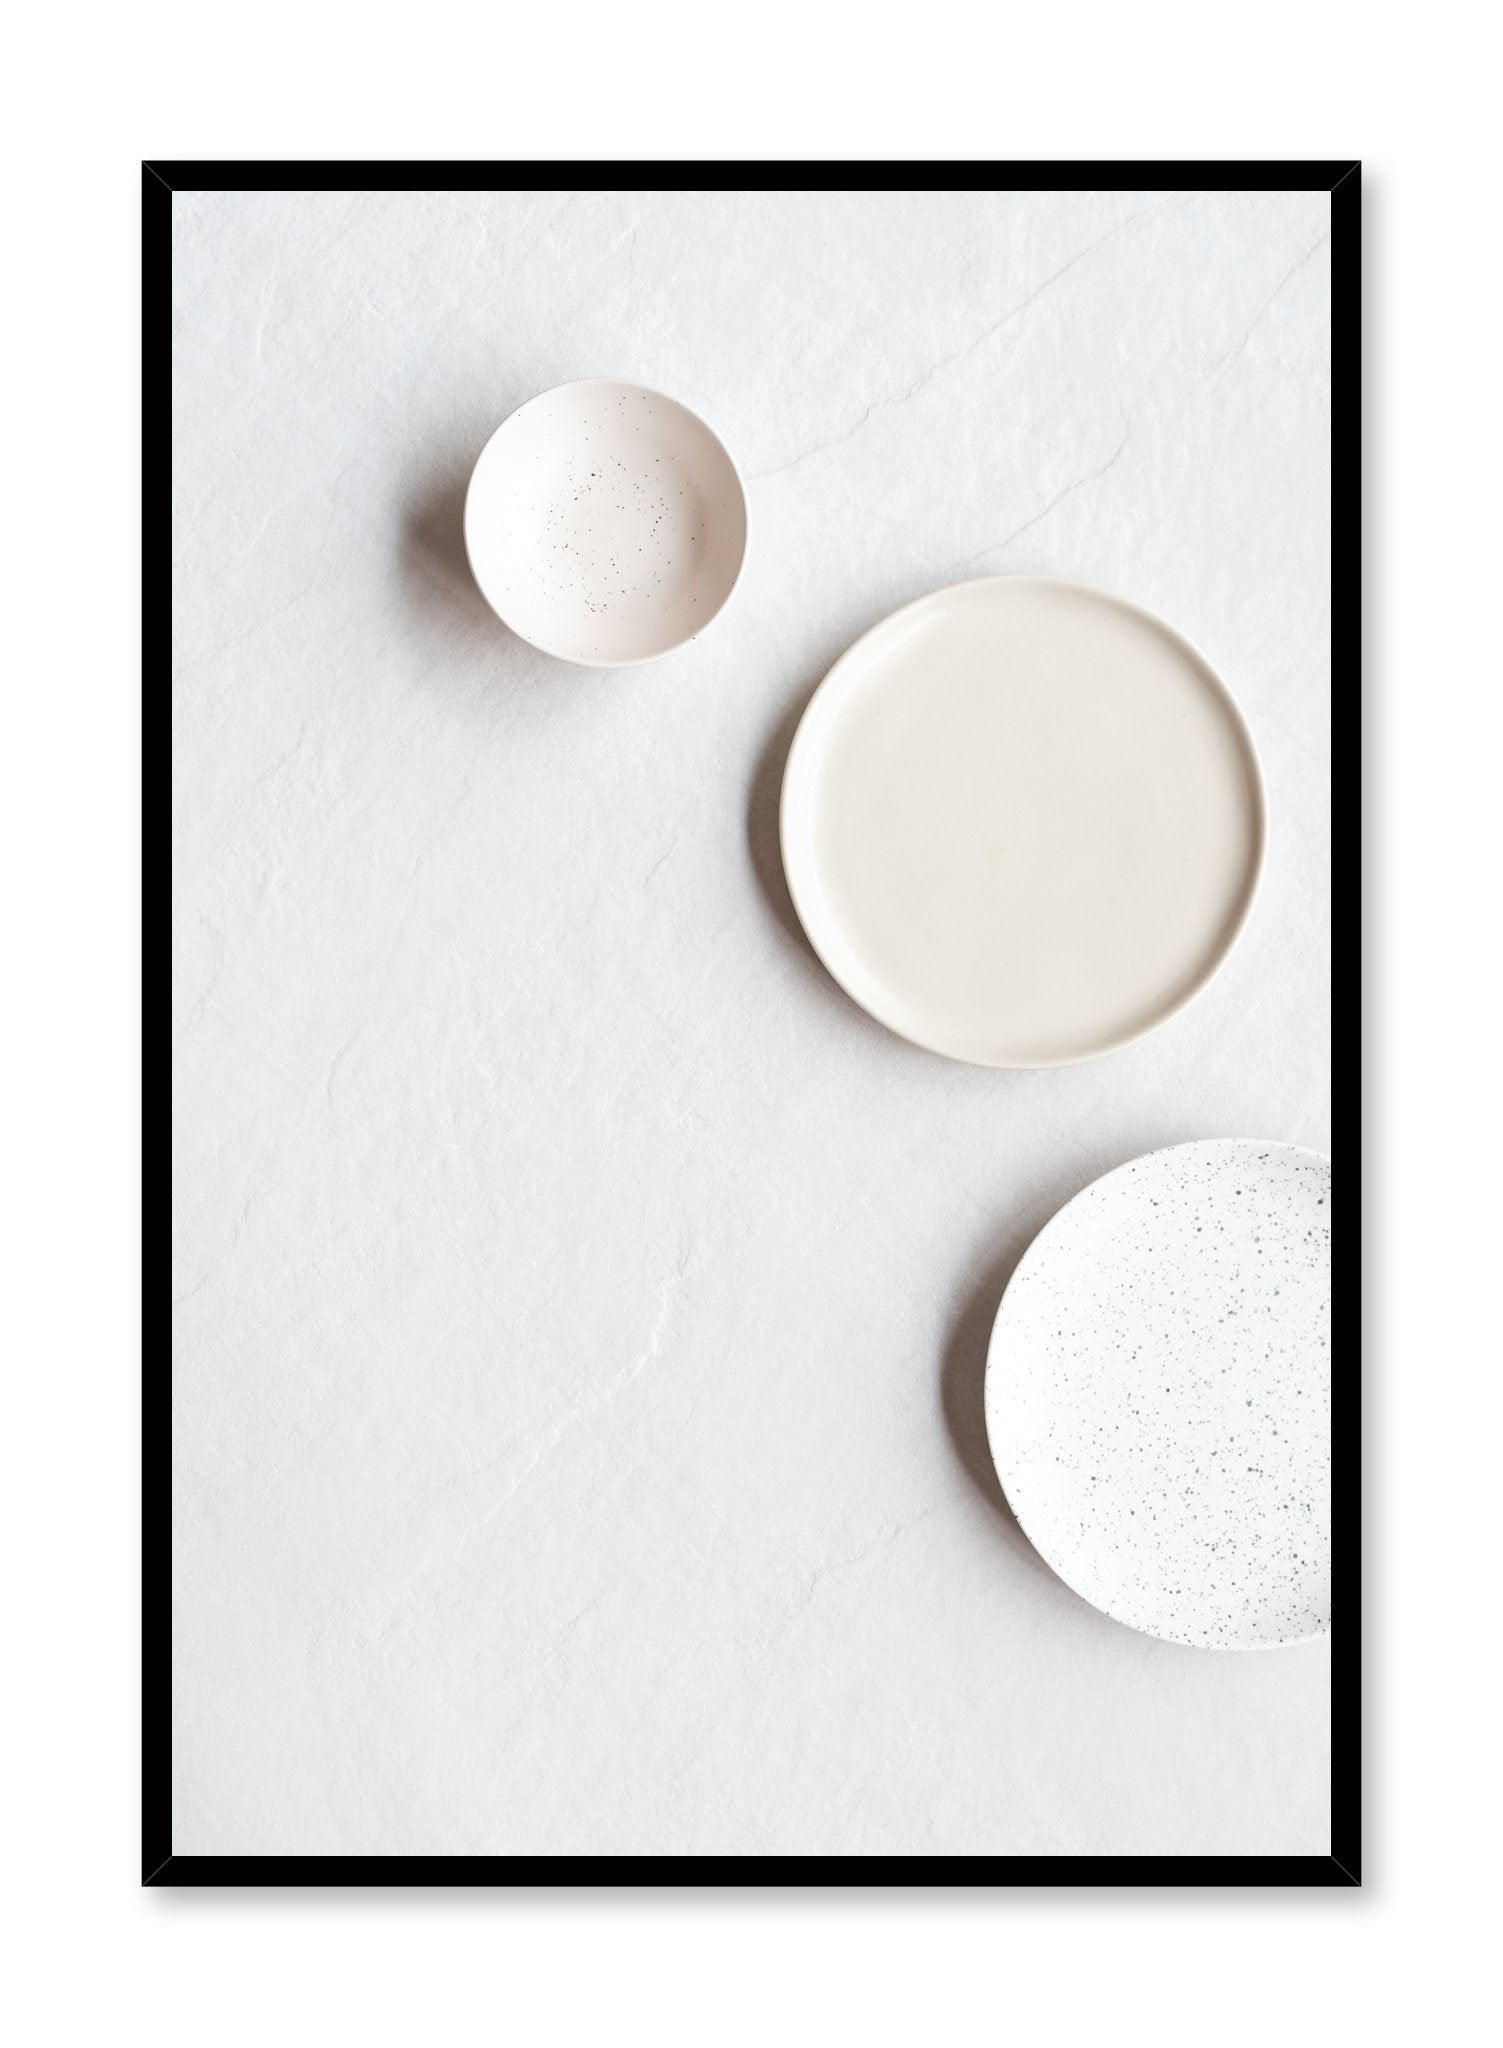 Minimalist poster by Opposite Wall with (tem)plates food photography